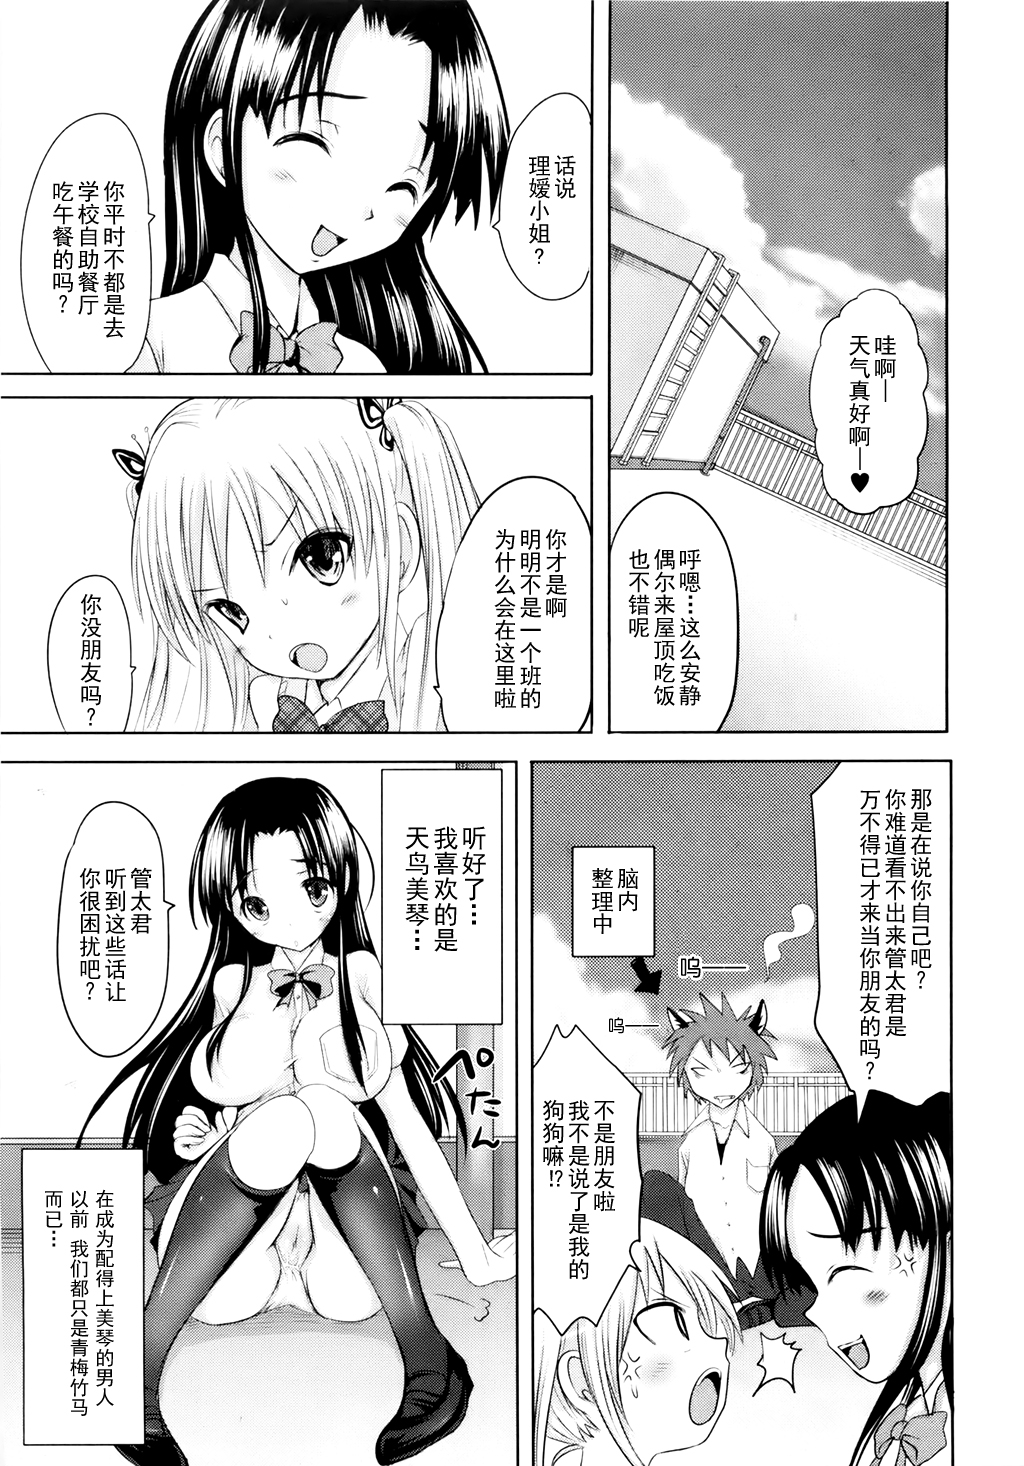 [Natsume Fumika] Sundere! Ch.4 [Chinese] [夏目文花] スンデレ! CH4[中文翻譯]